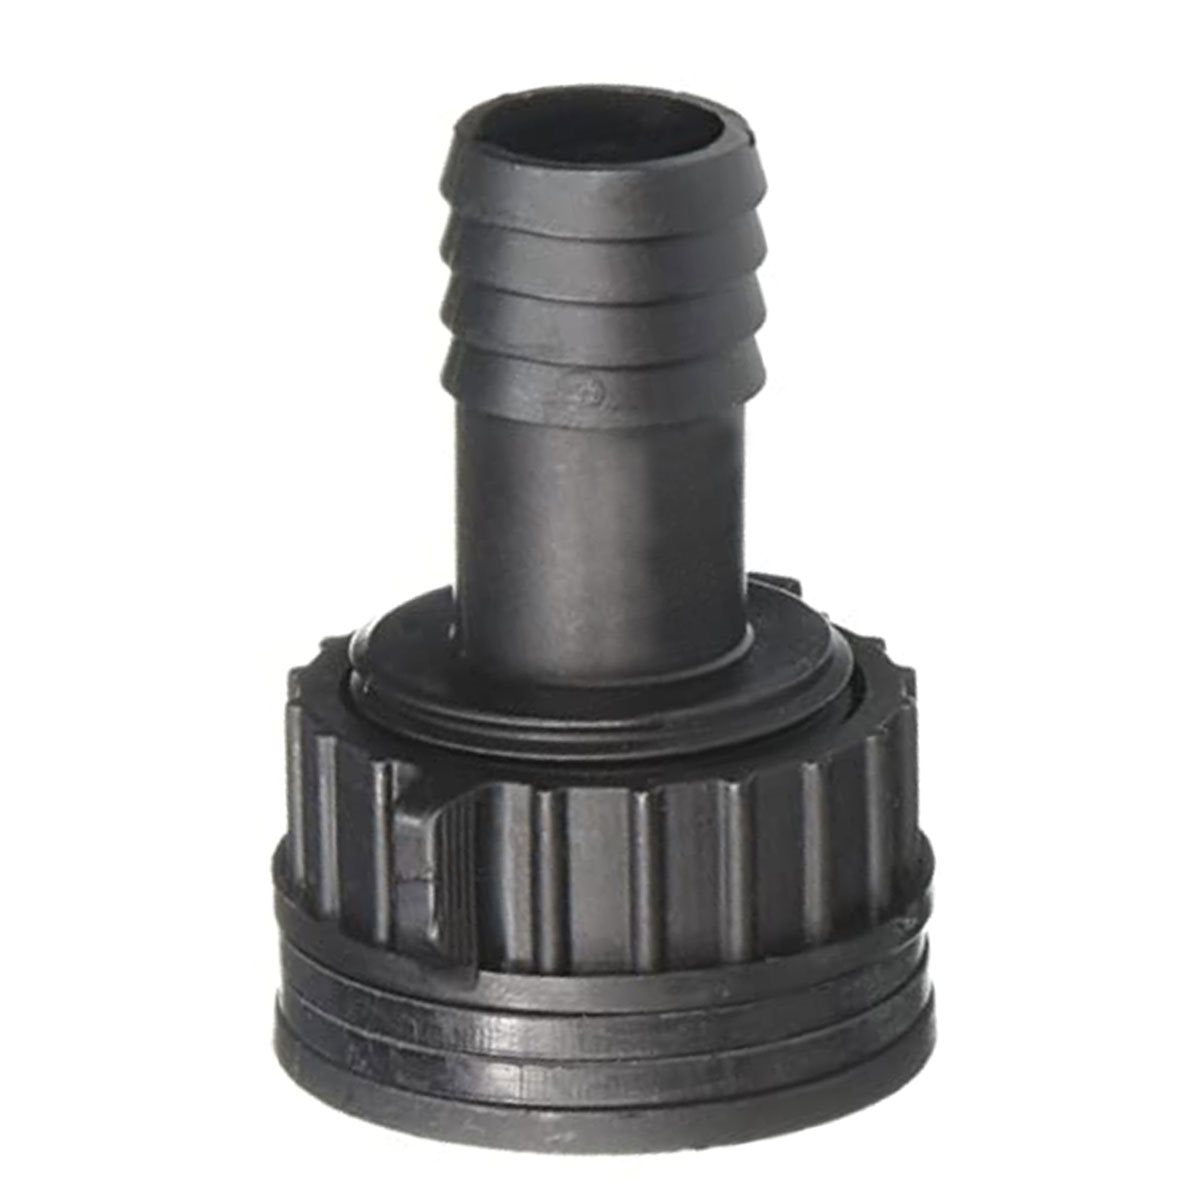 Drain Fitting 3 4 Tub Outlet-canada-grow-supplies